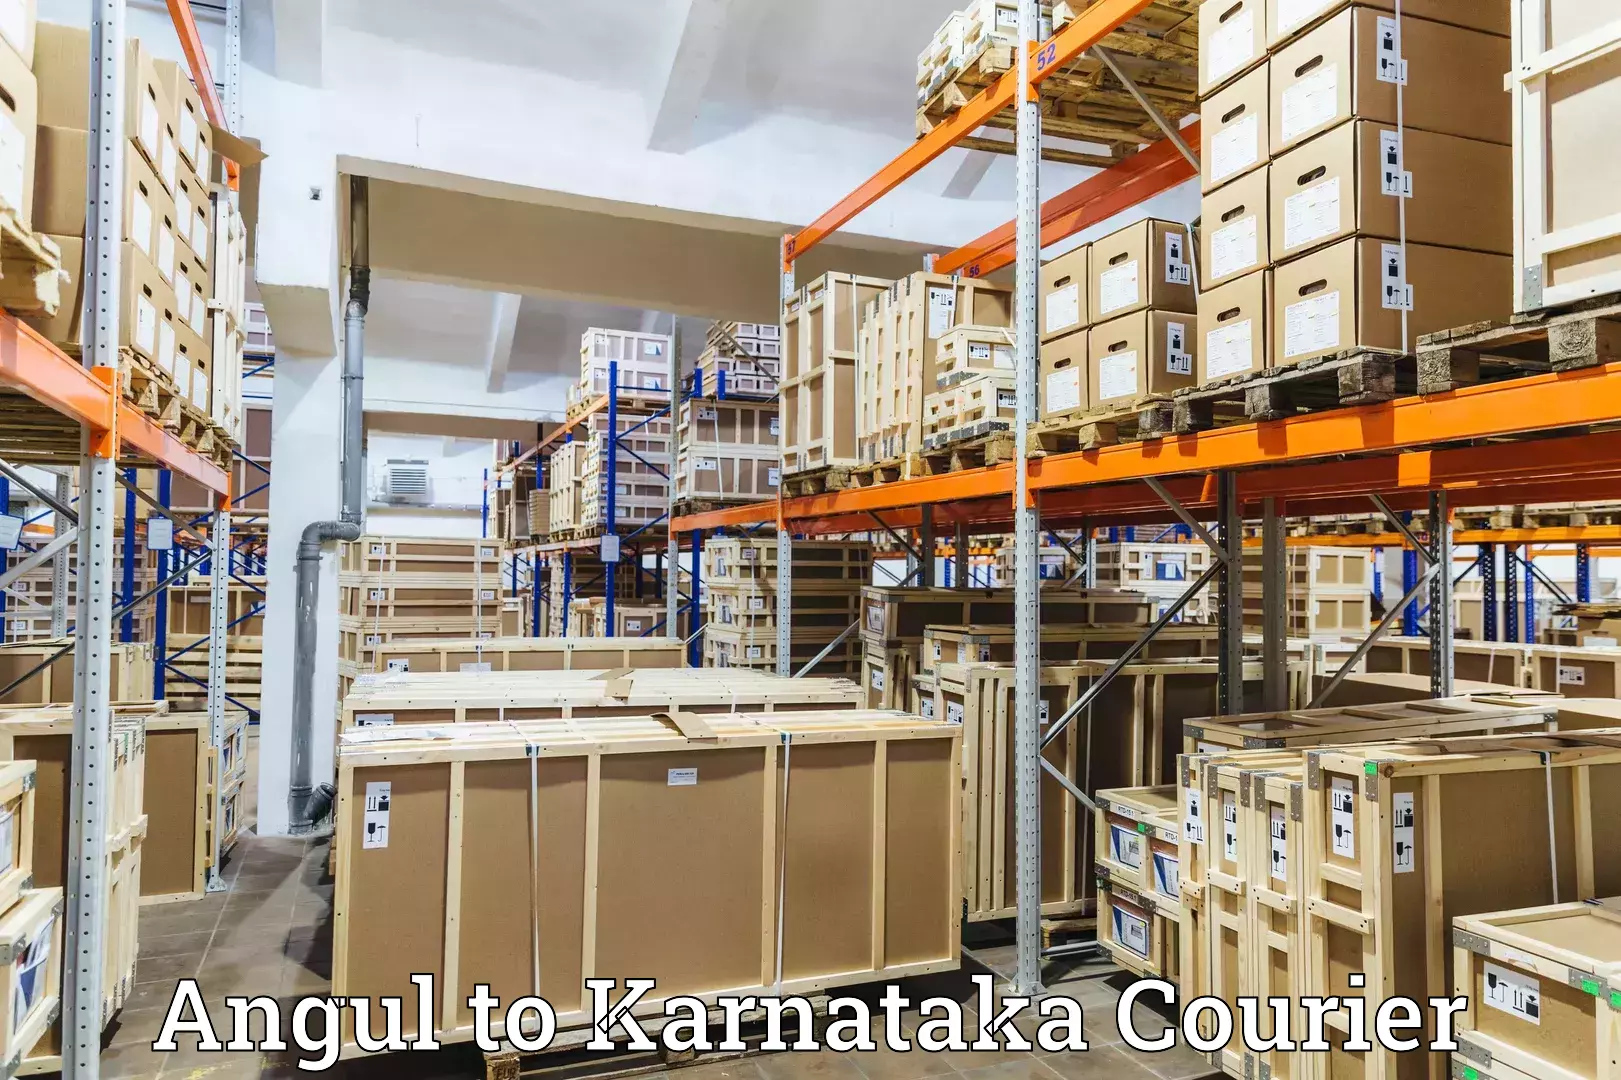 State-of-the-art courier technology Angul to Nipani